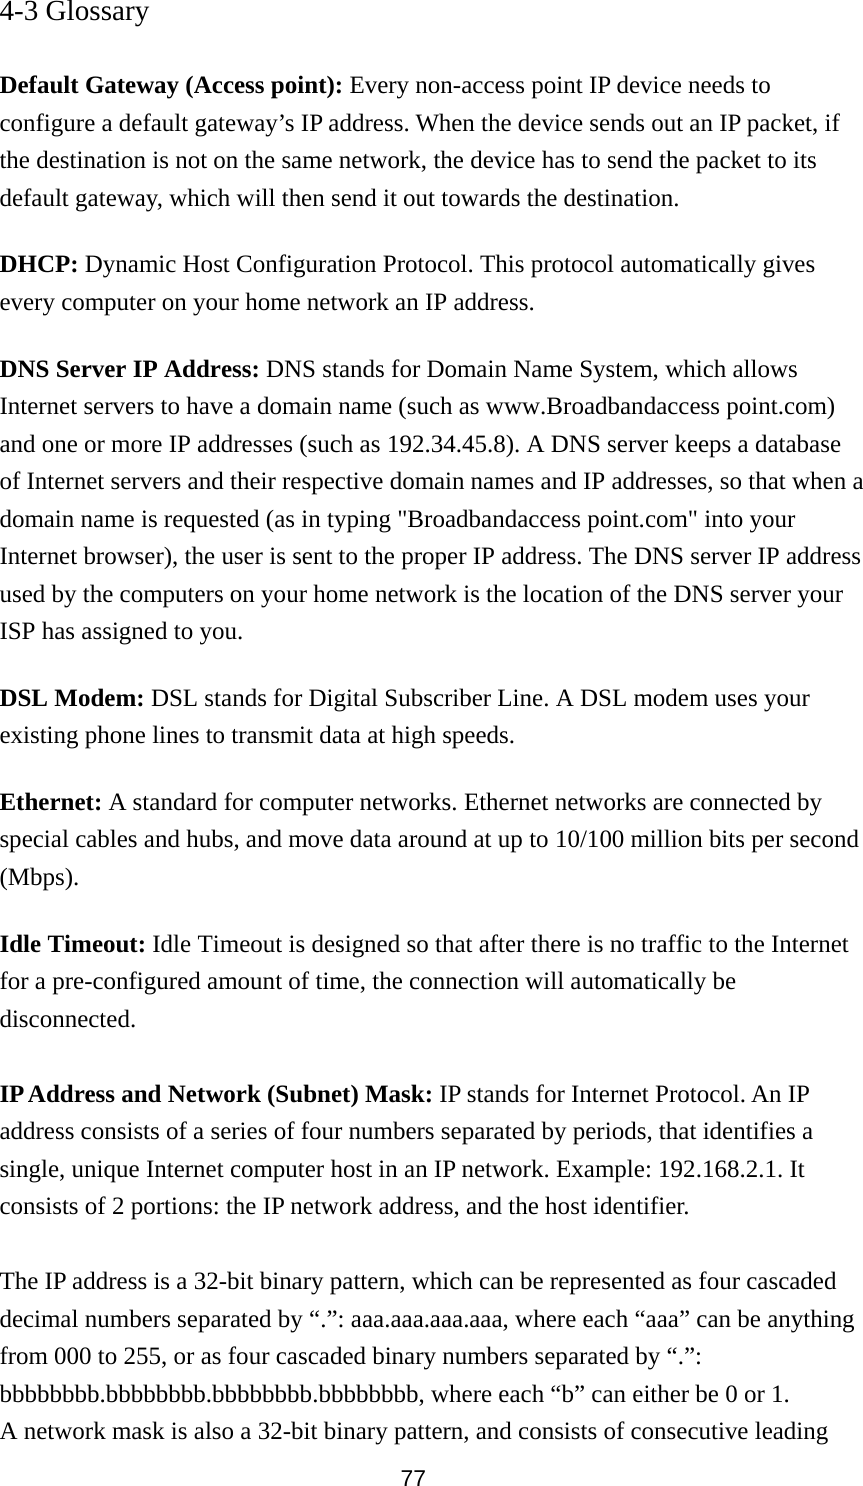 77 4-3 Glossary  Default Gateway (Access point): Every non-access point IP device needs to configure a default gateway’s IP address. When the device sends out an IP packet, if the destination is not on the same network, the device has to send the packet to its default gateway, which will then send it out towards the destination. DHCP: Dynamic Host Configuration Protocol. This protocol automatically gives every computer on your home network an IP address. DNS Server IP Address: DNS stands for Domain Name System, which allows Internet servers to have a domain name (such as www.Broadbandaccess point.com) and one or more IP addresses (such as 192.34.45.8). A DNS server keeps a database of Internet servers and their respective domain names and IP addresses, so that when a domain name is requested (as in typing &quot;Broadbandaccess point.com&quot; into your Internet browser), the user is sent to the proper IP address. The DNS server IP address used by the computers on your home network is the location of the DNS server your ISP has assigned to you.   DSL Modem: DSL stands for Digital Subscriber Line. A DSL modem uses your existing phone lines to transmit data at high speeds.   Ethernet: A standard for computer networks. Ethernet networks are connected by special cables and hubs, and move data around at up to 10/100 million bits per second (Mbps).  Idle Timeout: Idle Timeout is designed so that after there is no traffic to the Internet for a pre-configured amount of time, the connection will automatically be disconnected.  IP Address and Network (Subnet) Mask: IP stands for Internet Protocol. An IP address consists of a series of four numbers separated by periods, that identifies a single, unique Internet computer host in an IP network. Example: 192.168.2.1. It consists of 2 portions: the IP network address, and the host identifier.  The IP address is a 32-bit binary pattern, which can be represented as four cascaded decimal numbers separated by “.”: aaa.aaa.aaa.aaa, where each “aaa” can be anything from 000 to 255, or as four cascaded binary numbers separated by “.”: bbbbbbbb.bbbbbbbb.bbbbbbbb.bbbbbbbb, where each “b” can either be 0 or 1. A network mask is also a 32-bit binary pattern, and consists of consecutive leading 